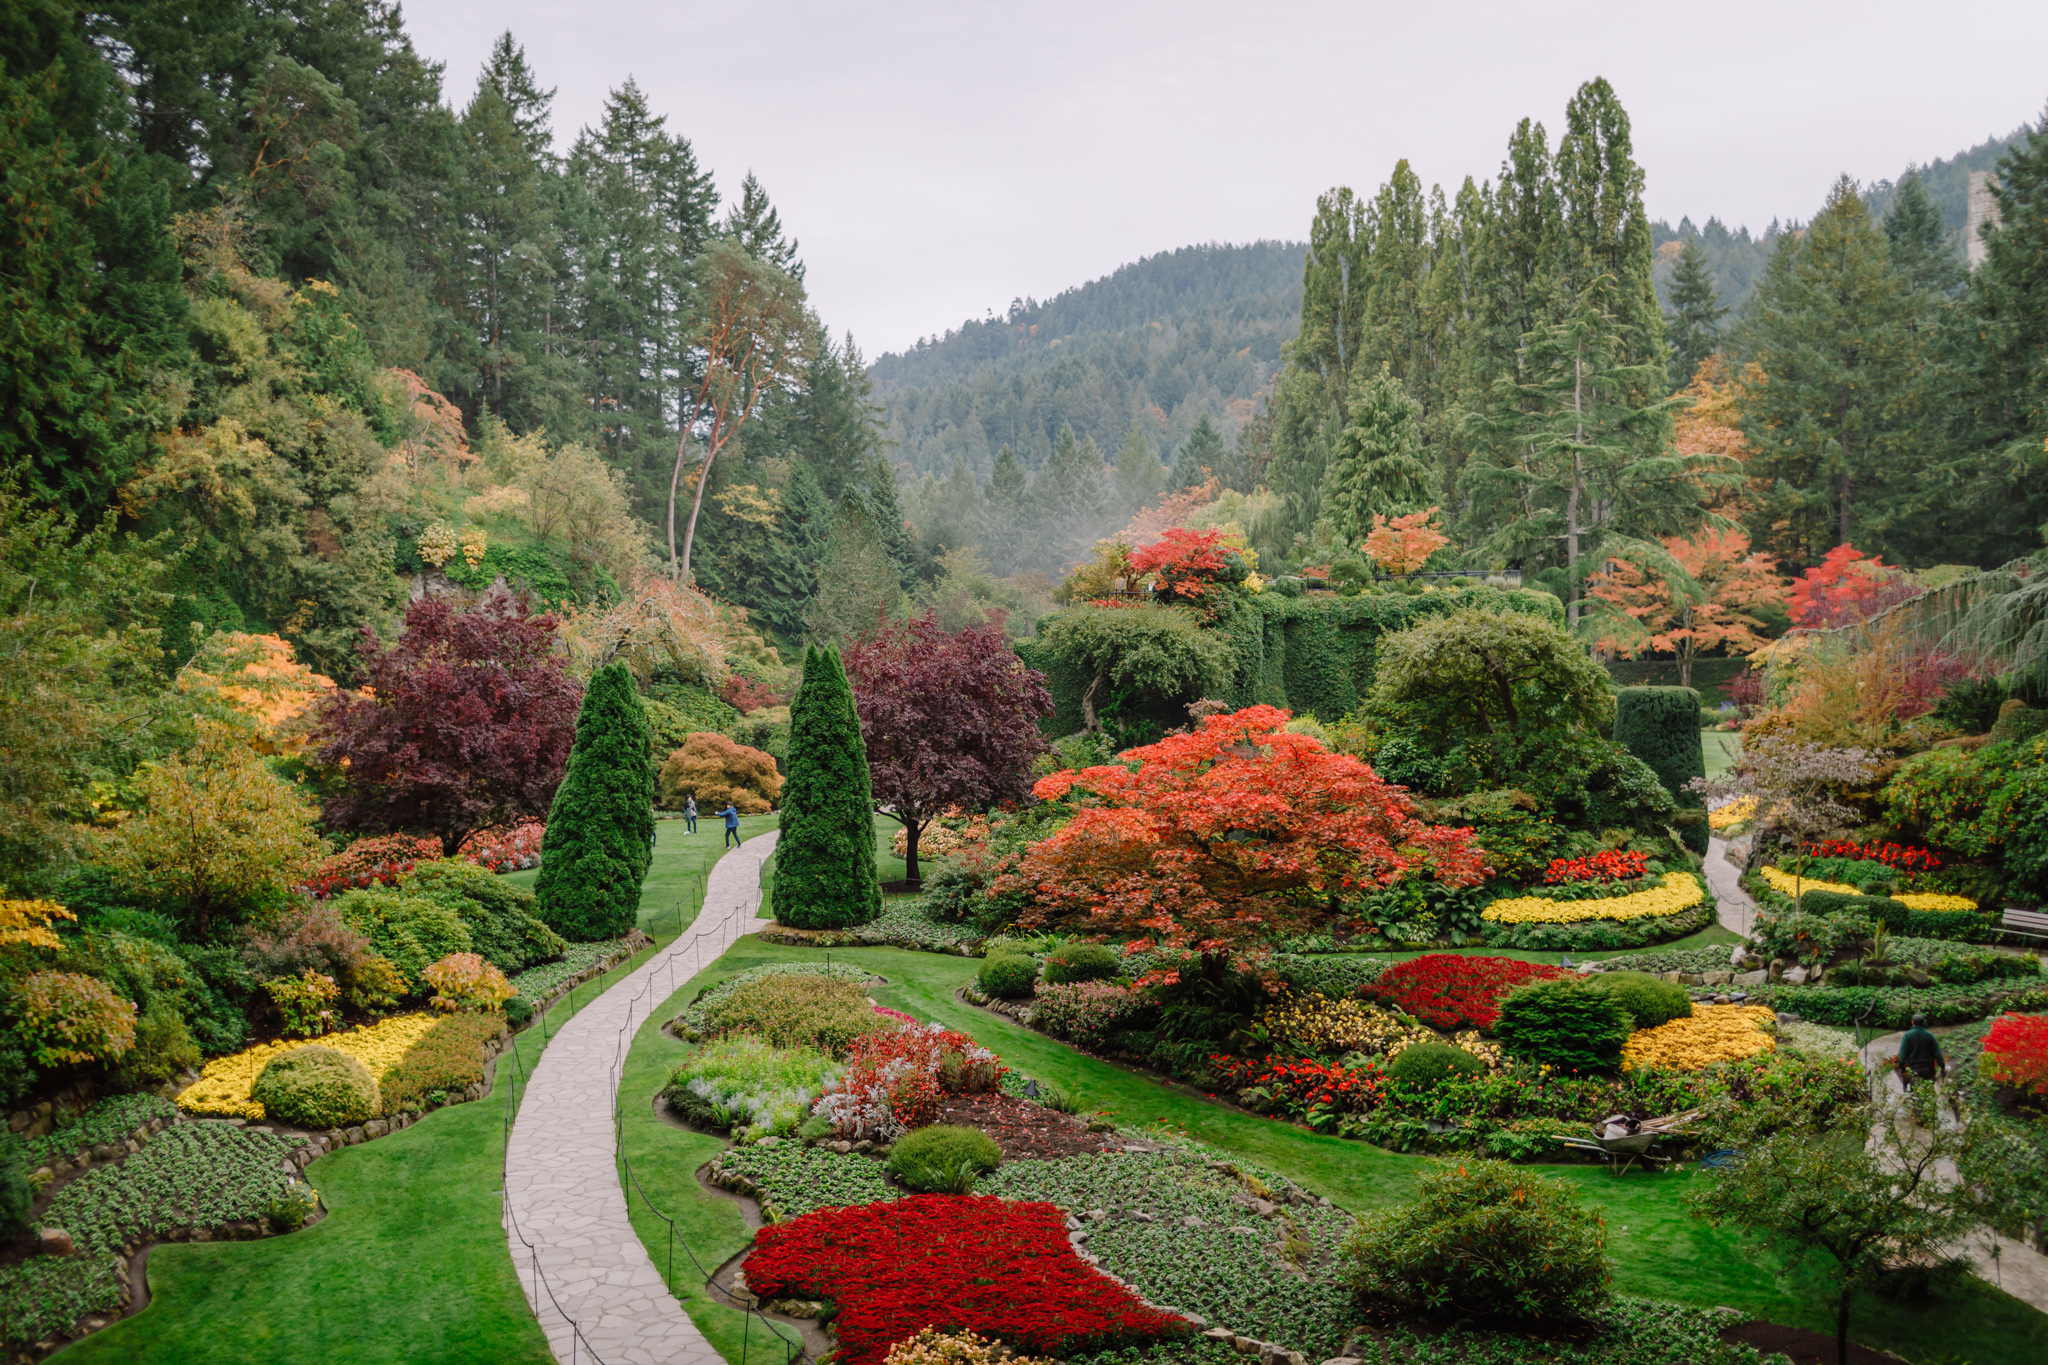 The Butchart Gardens in Victoria, BC